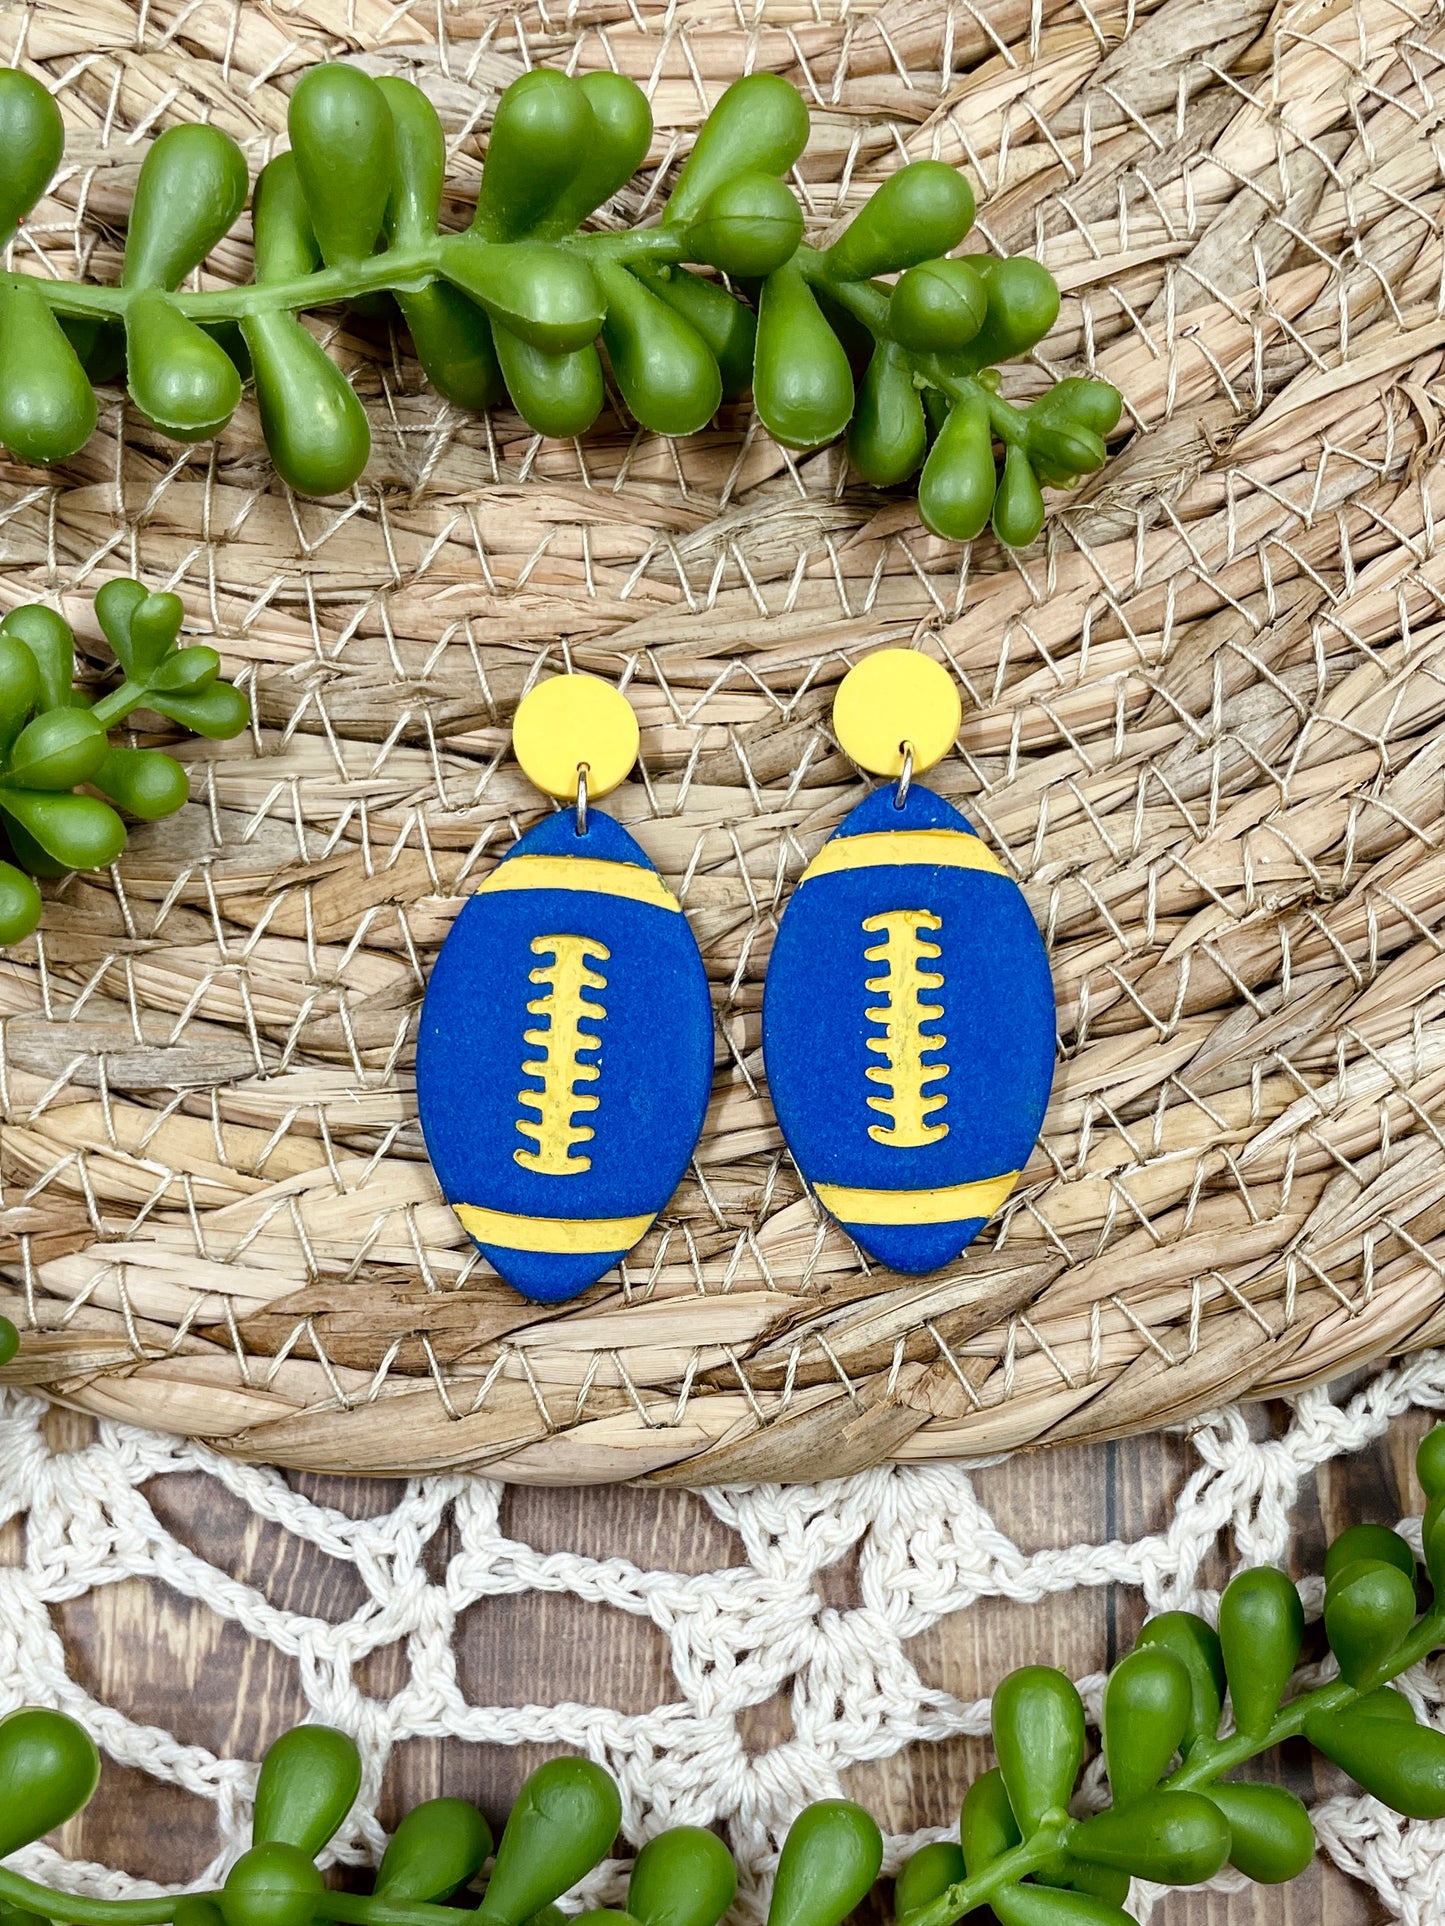 Blue and Yellow Cheer & Football Clay Earrings